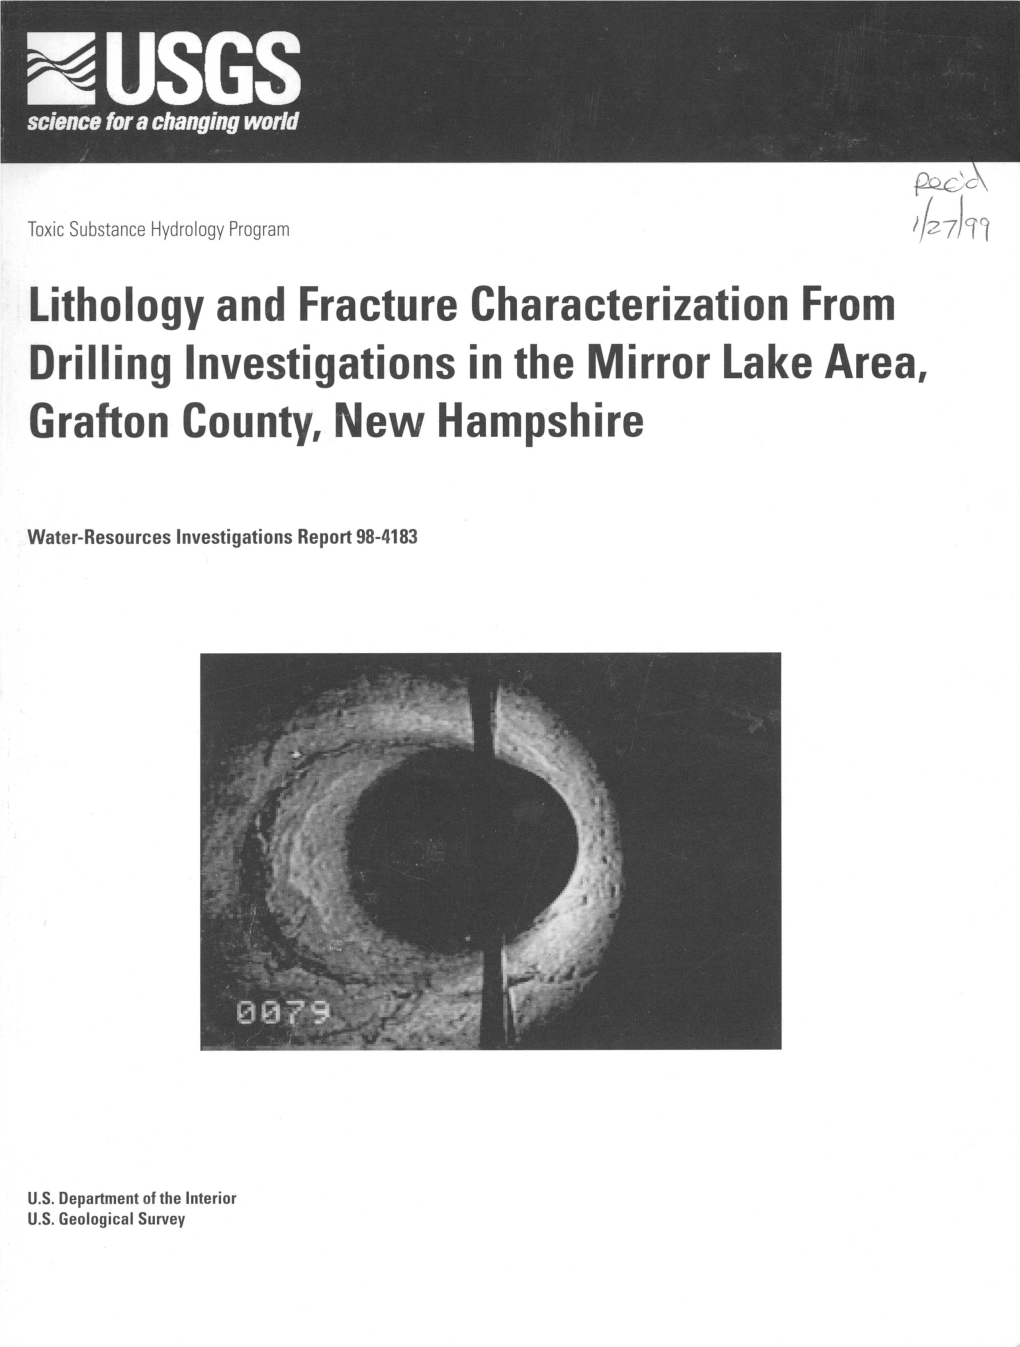 Lithology and Fracture Characterization from Drilling Investigations in the Mirror Lake Area, Grafton County, New Hampshire